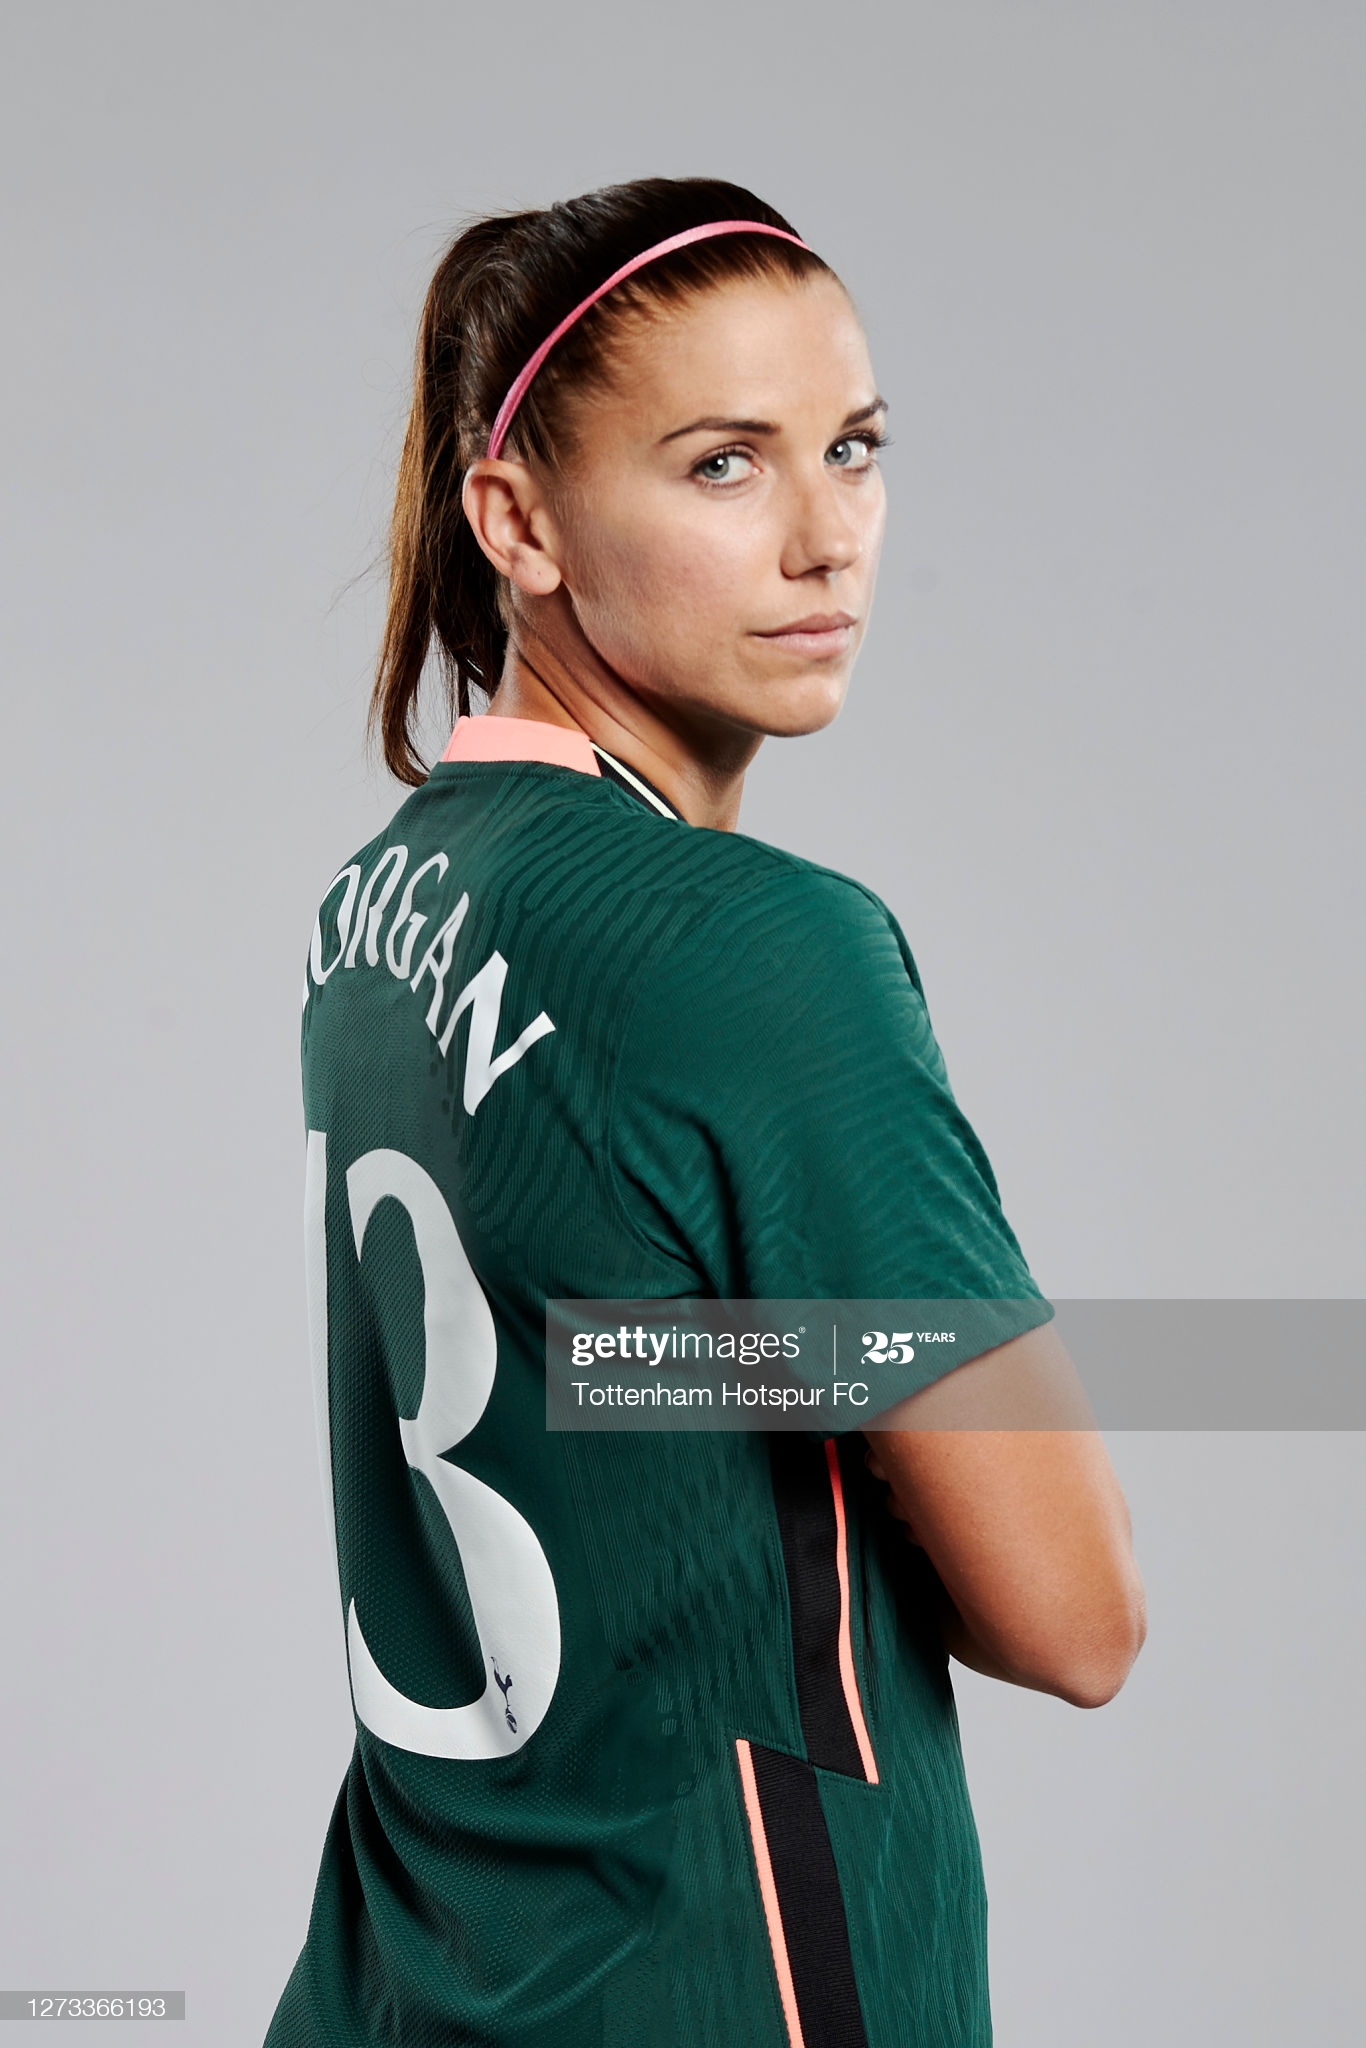 gettyimages-1273366193-2048x2048.jpg